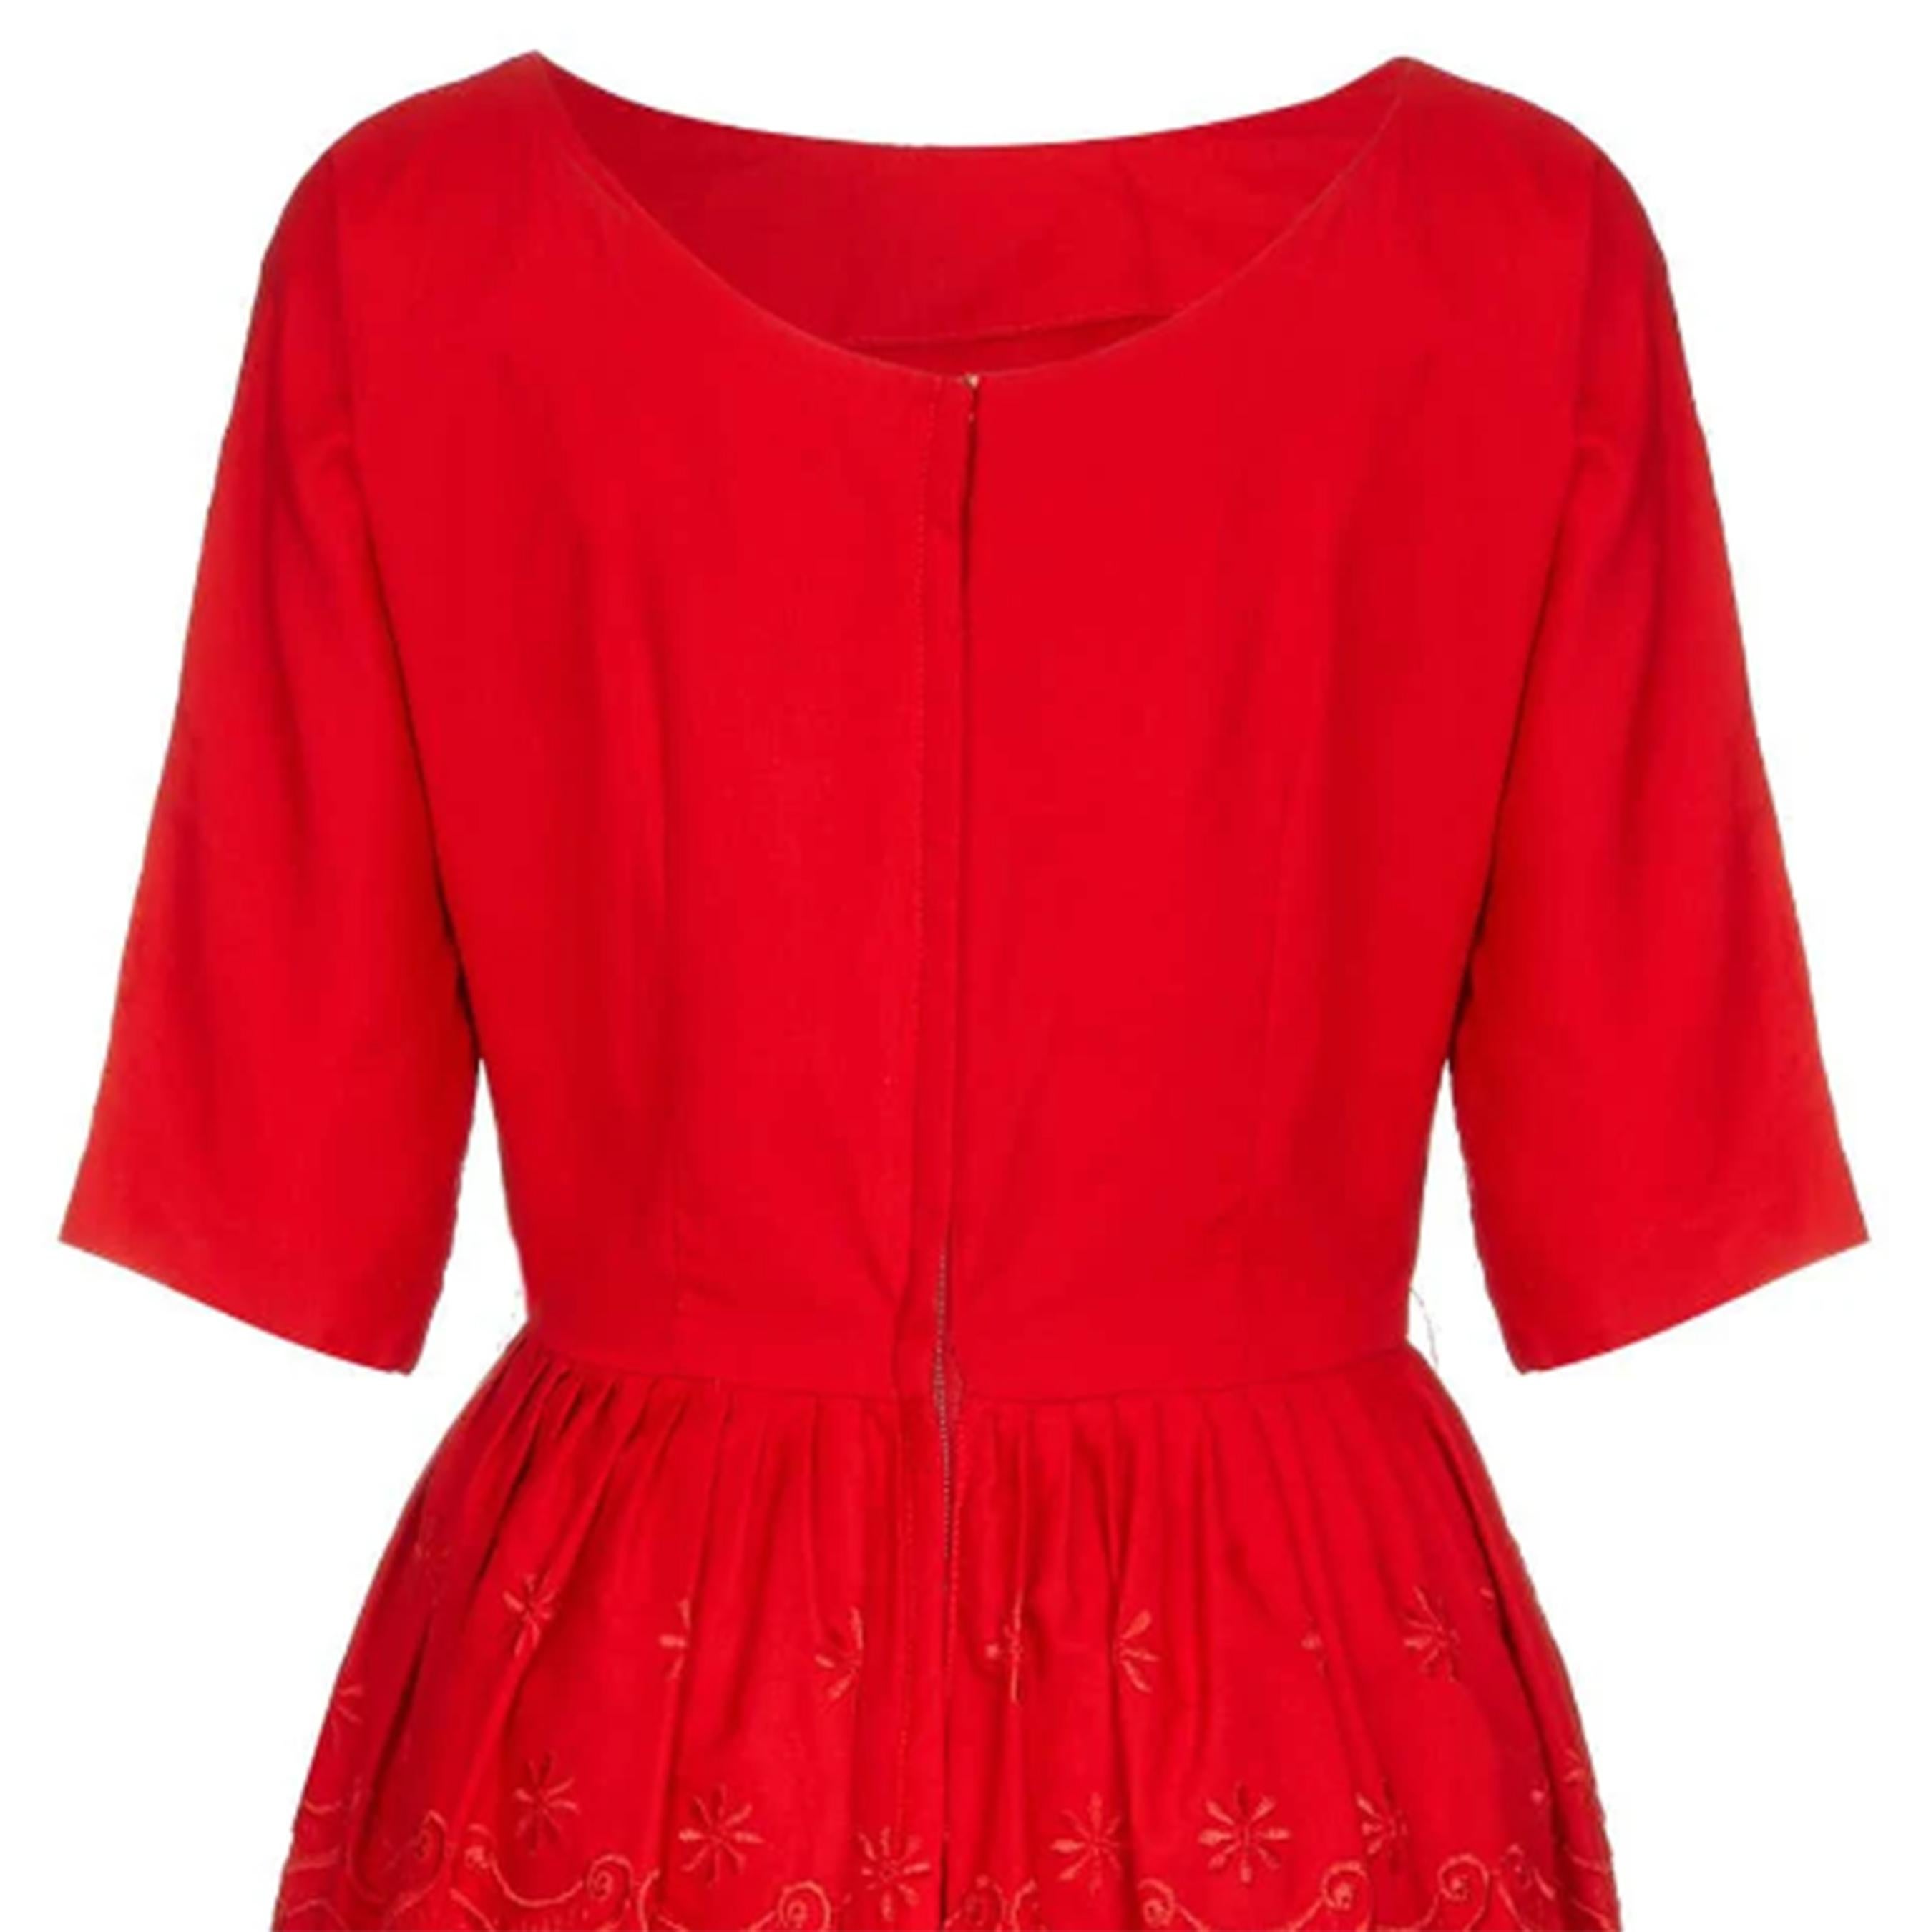 1950s Red Cotton Dress with Embroidered Peplum For Sale 1